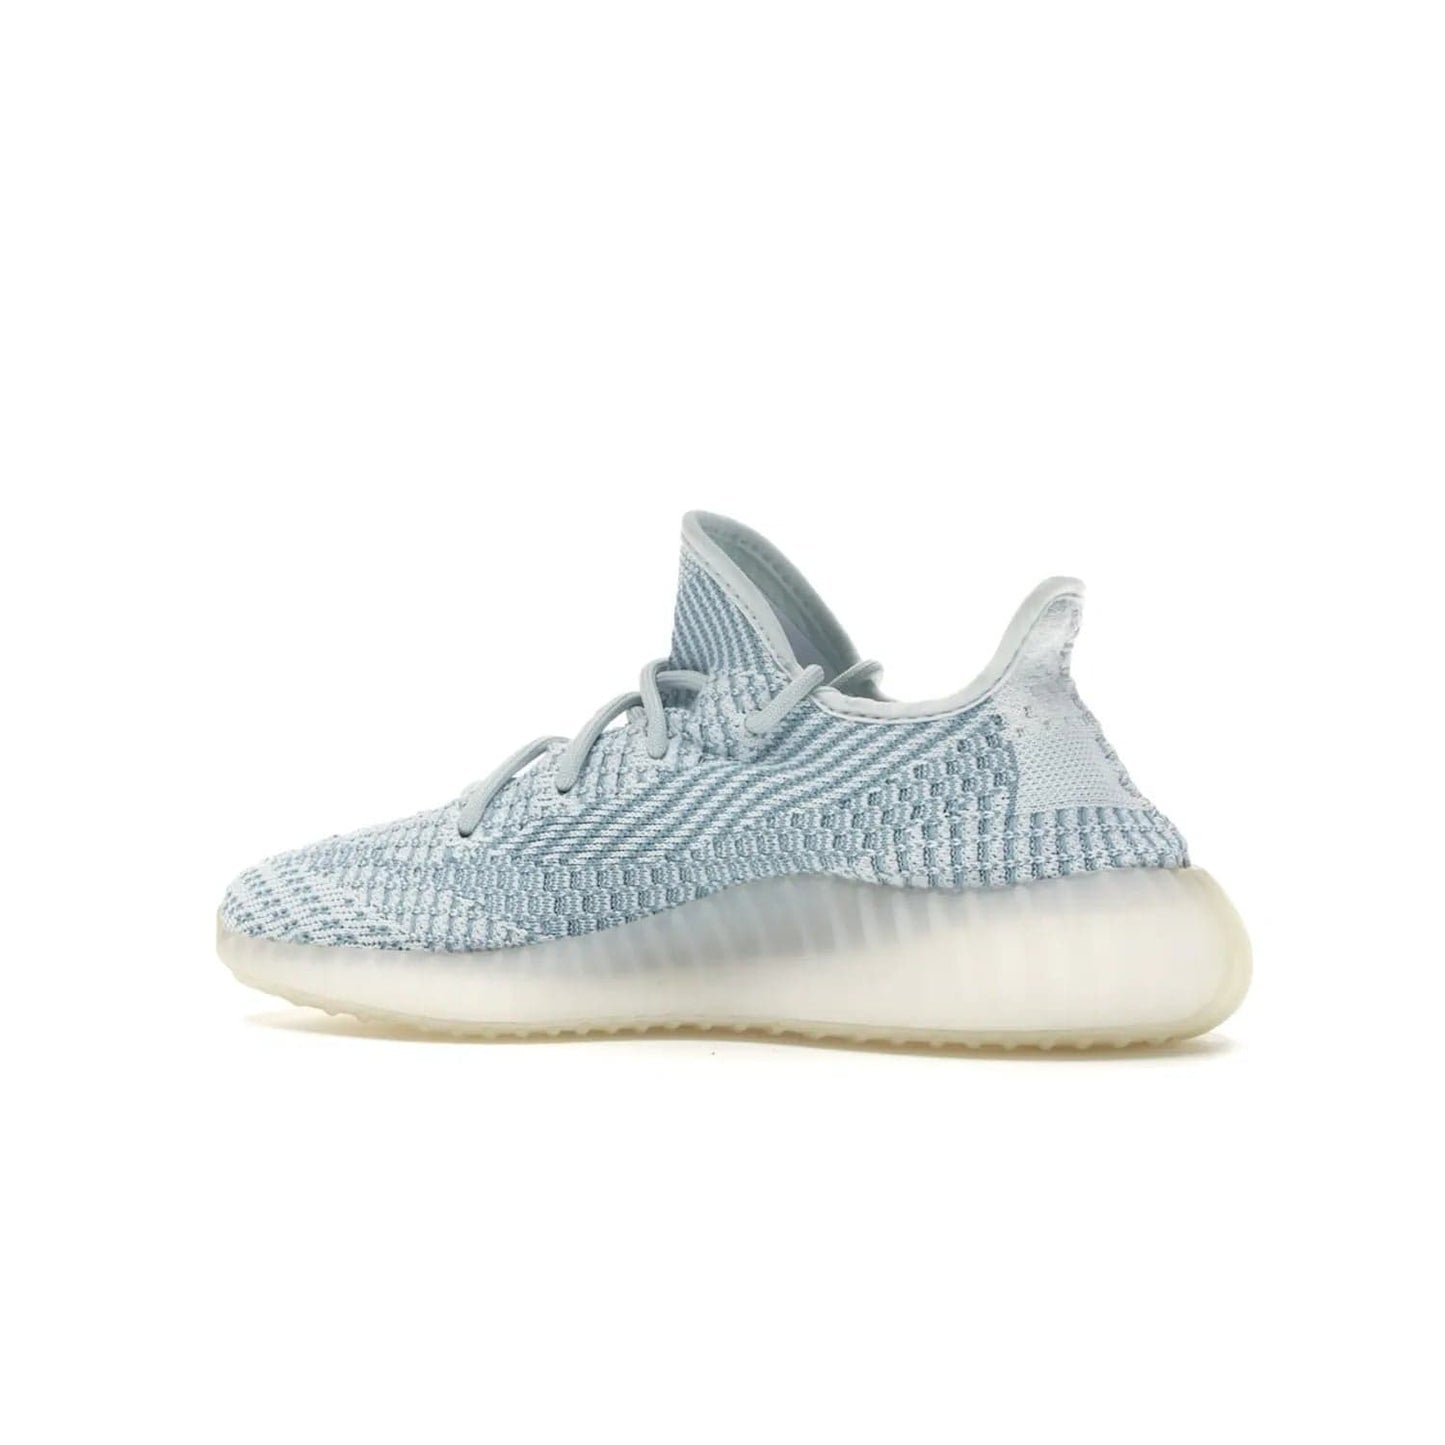 adidas Yeezy Boost 350 V2 Cloud White (Non-Reflective) - Image 21 - Only at www.BallersClubKickz.com - Adidas Yeezy Boost 350 V2 Cloud White (Non-Reflective) features Primeknit fabric and a unique, eye-catching design of cream, bluish-white, and transparent strip. Step out in timeless style with this eye-catching sneaker.